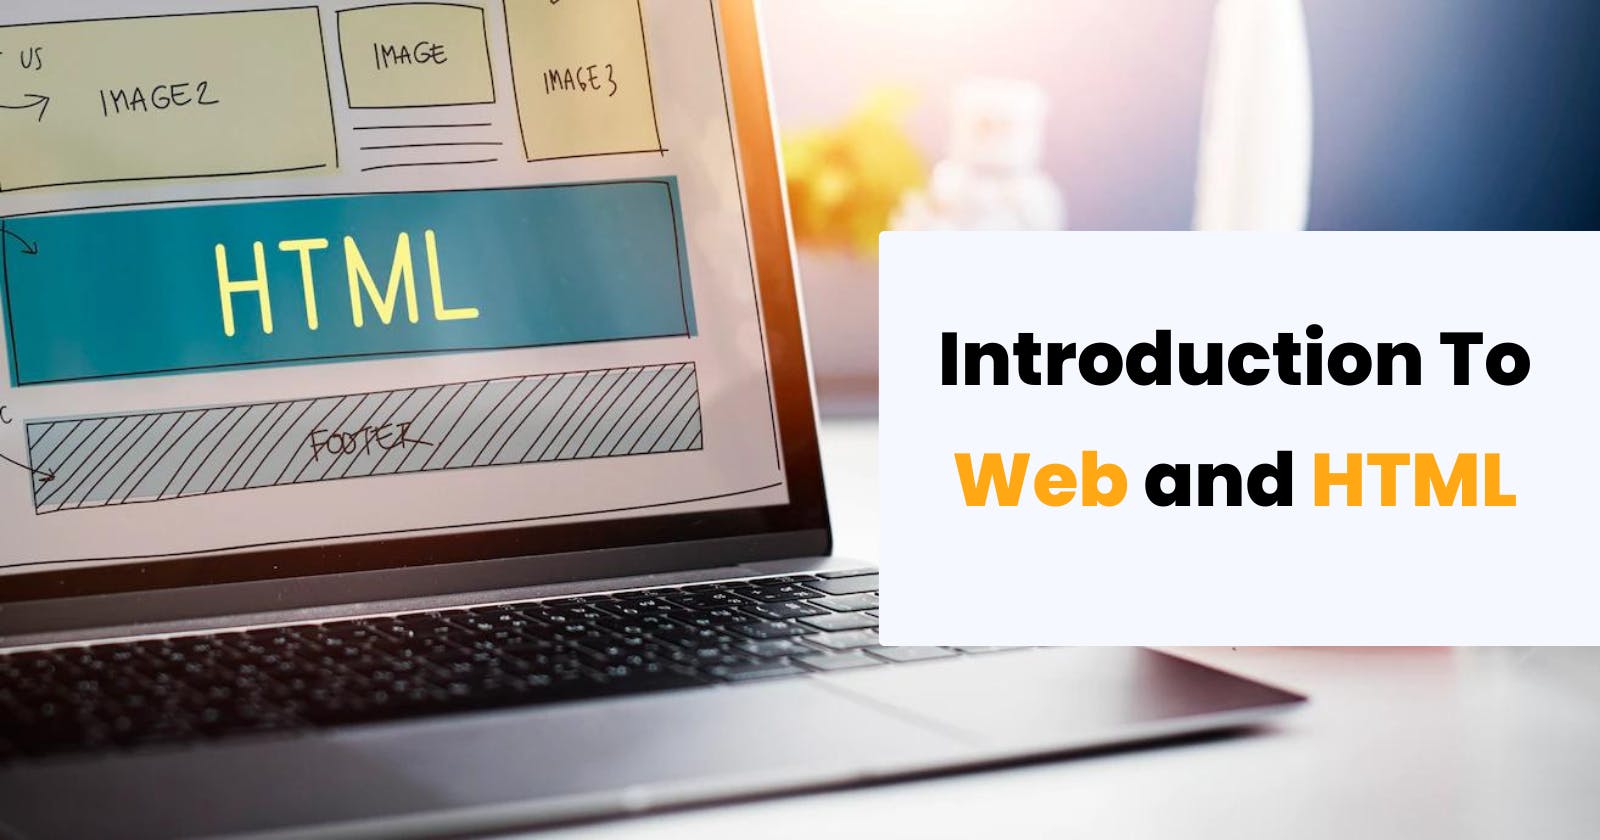 Introduction To Web and HTML